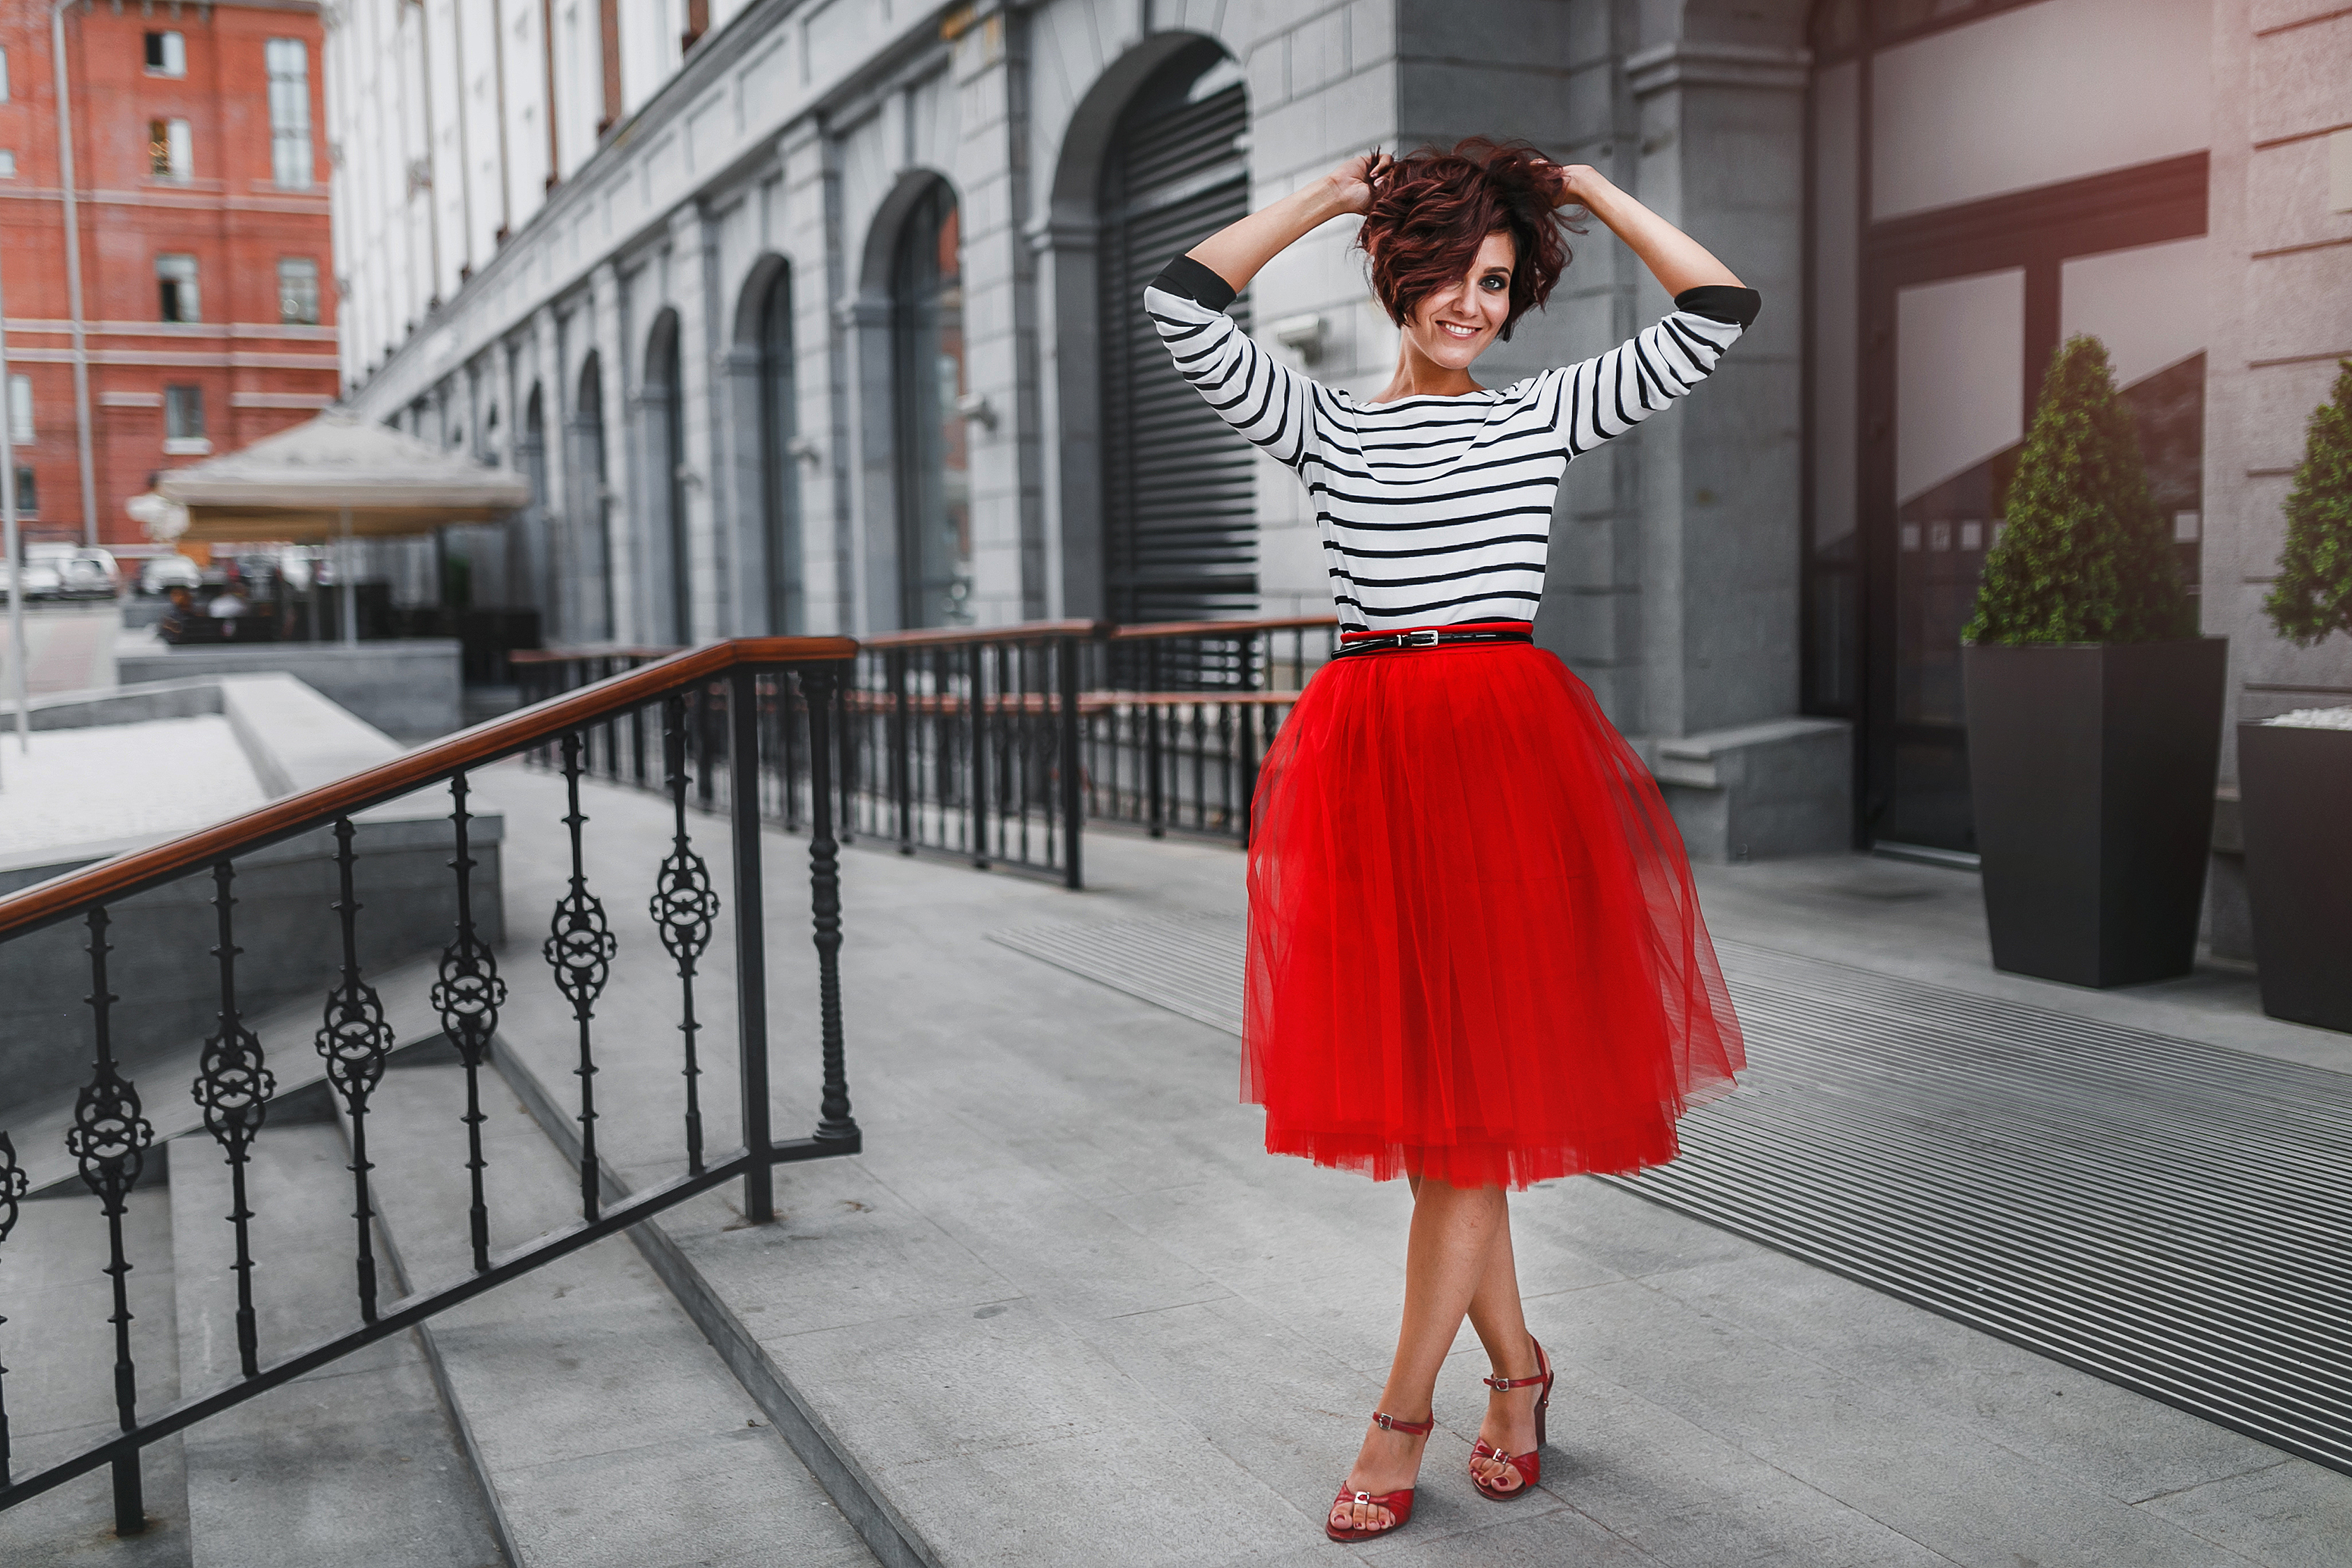 Striped T-Shirt, Red Skirt, And High Heels